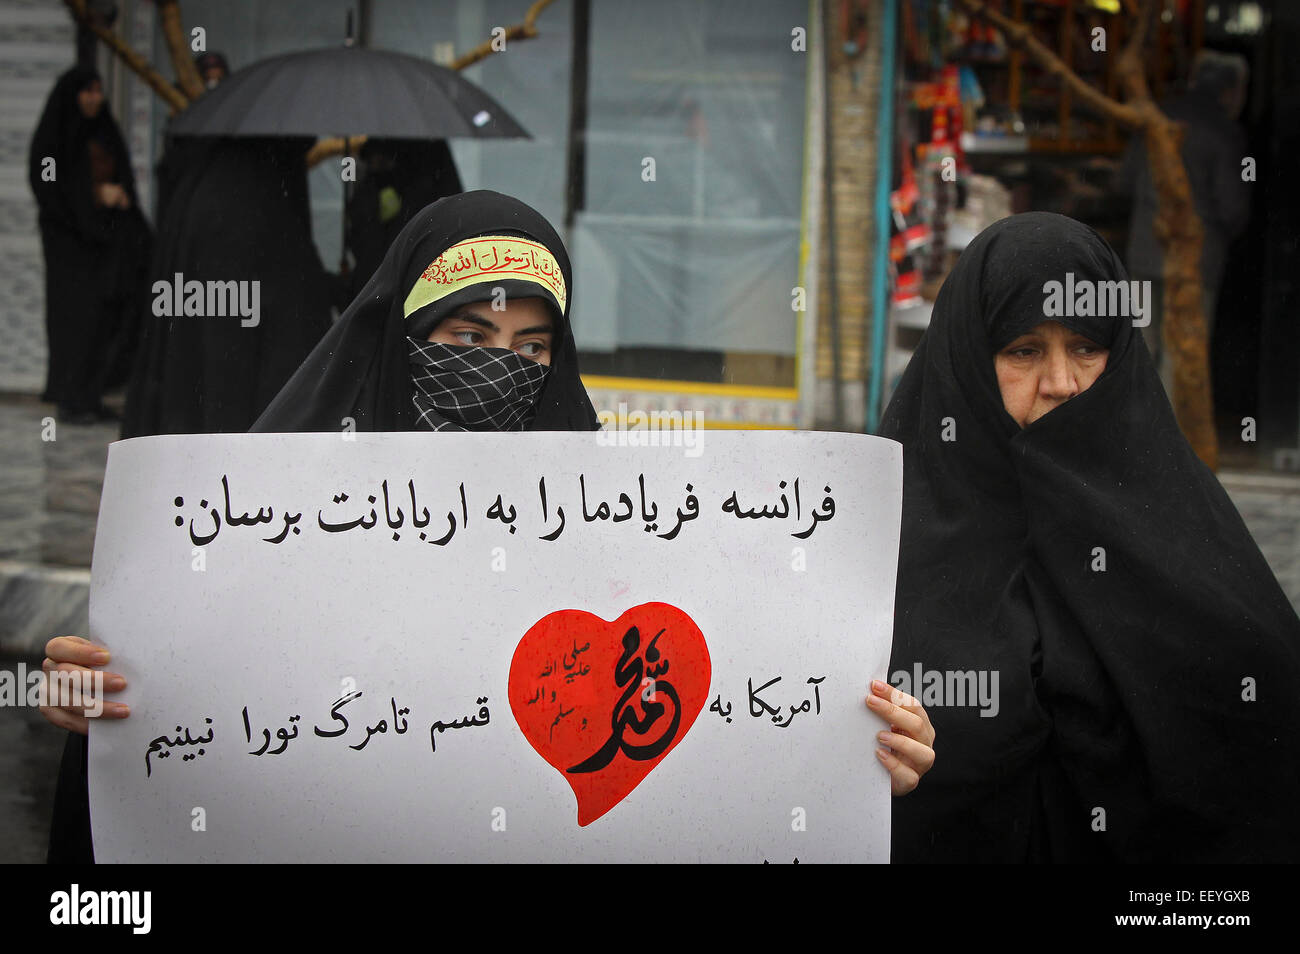 Mashhad, Iran. 23rd Jan, 2015. Iranian women take part in a protest against the printing of satirical sketches of the Prophet Muhammad by French magazine Charlie Hebdo in Mashhad, Iran, on Jan. 23, 2015. © Ahmad Halabisaz/Xinhua/Alamy Live News Stock Photo